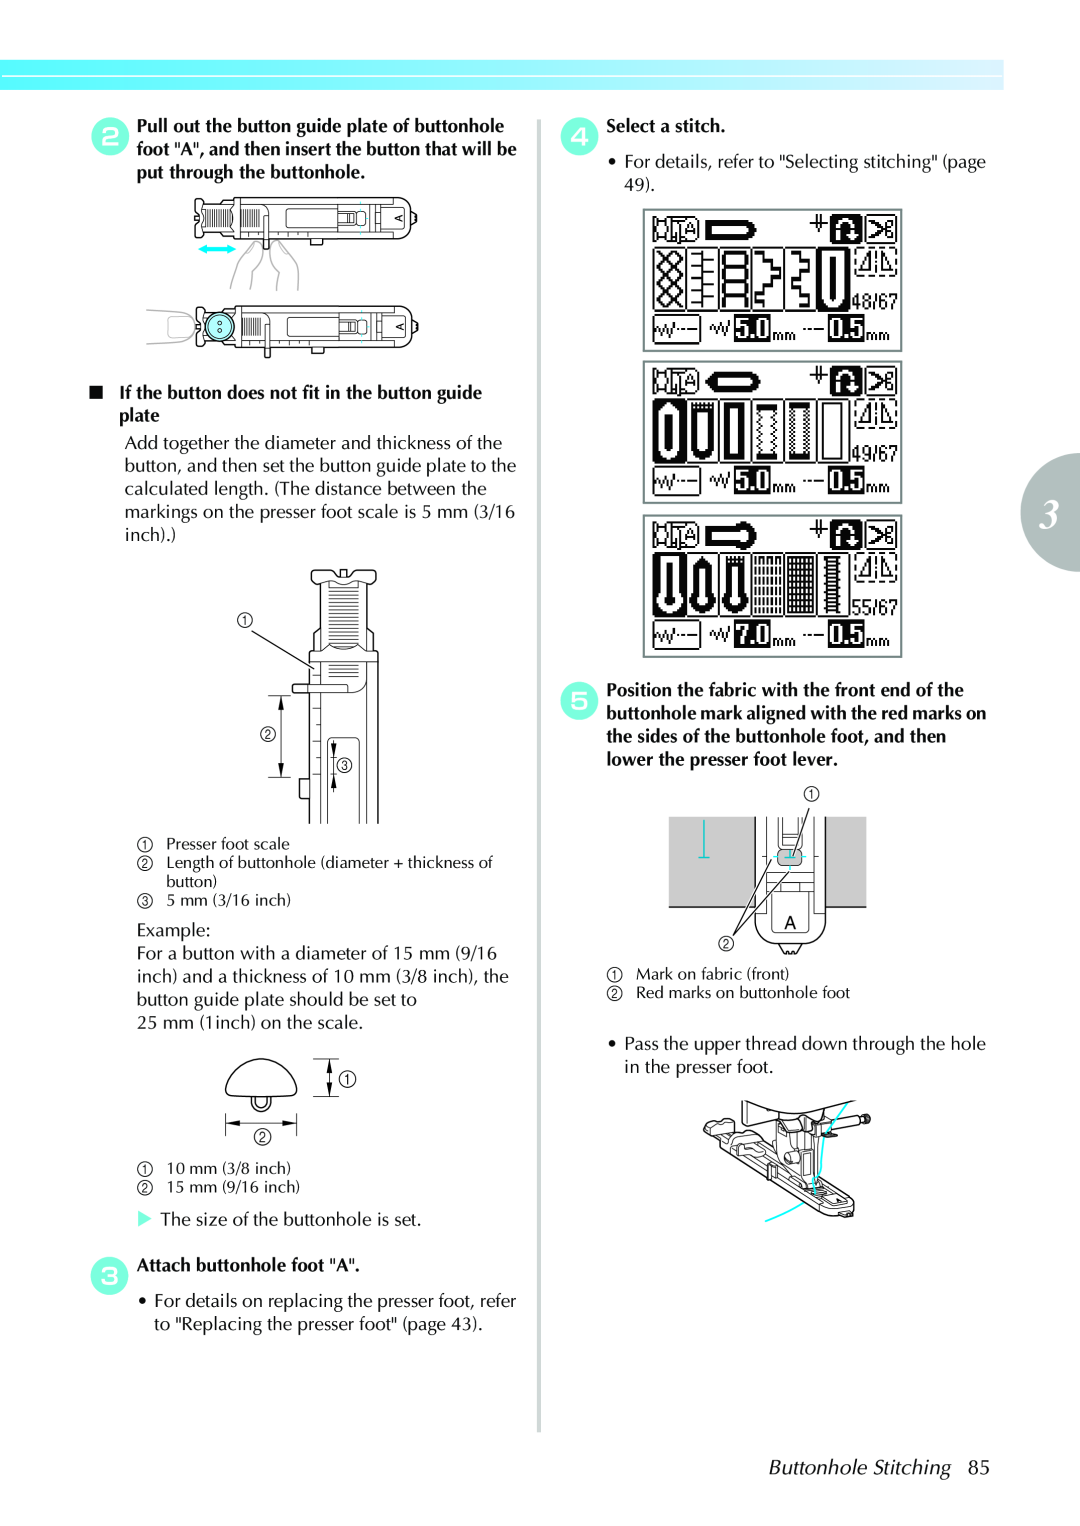 Brother 885-V31, 885-V33 operation manual Buttonhole Stitching, If the button does not fit in the button guide plate 